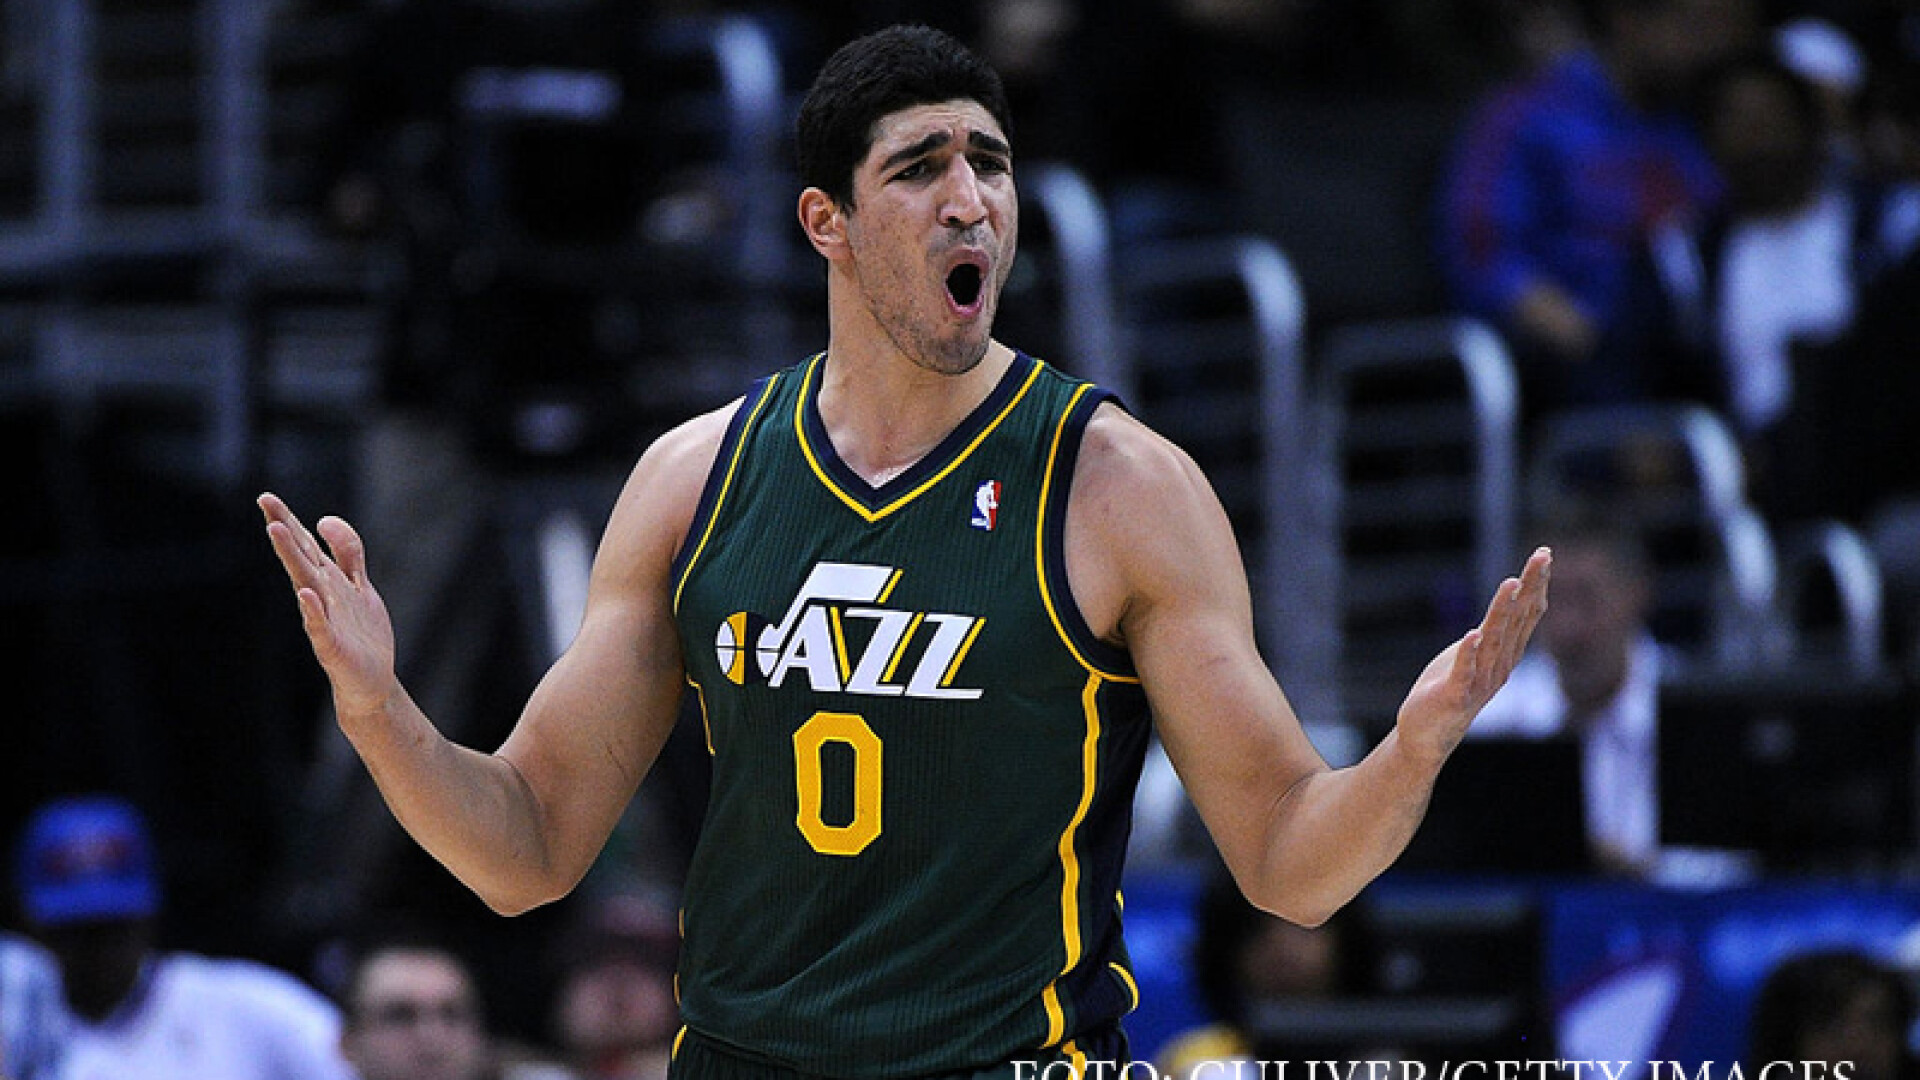 Enes Kanter #0 of Utah Jazz reacts during the game against the Los Angeles Clippers Center on December 28, 2013 in Los Angeles, California